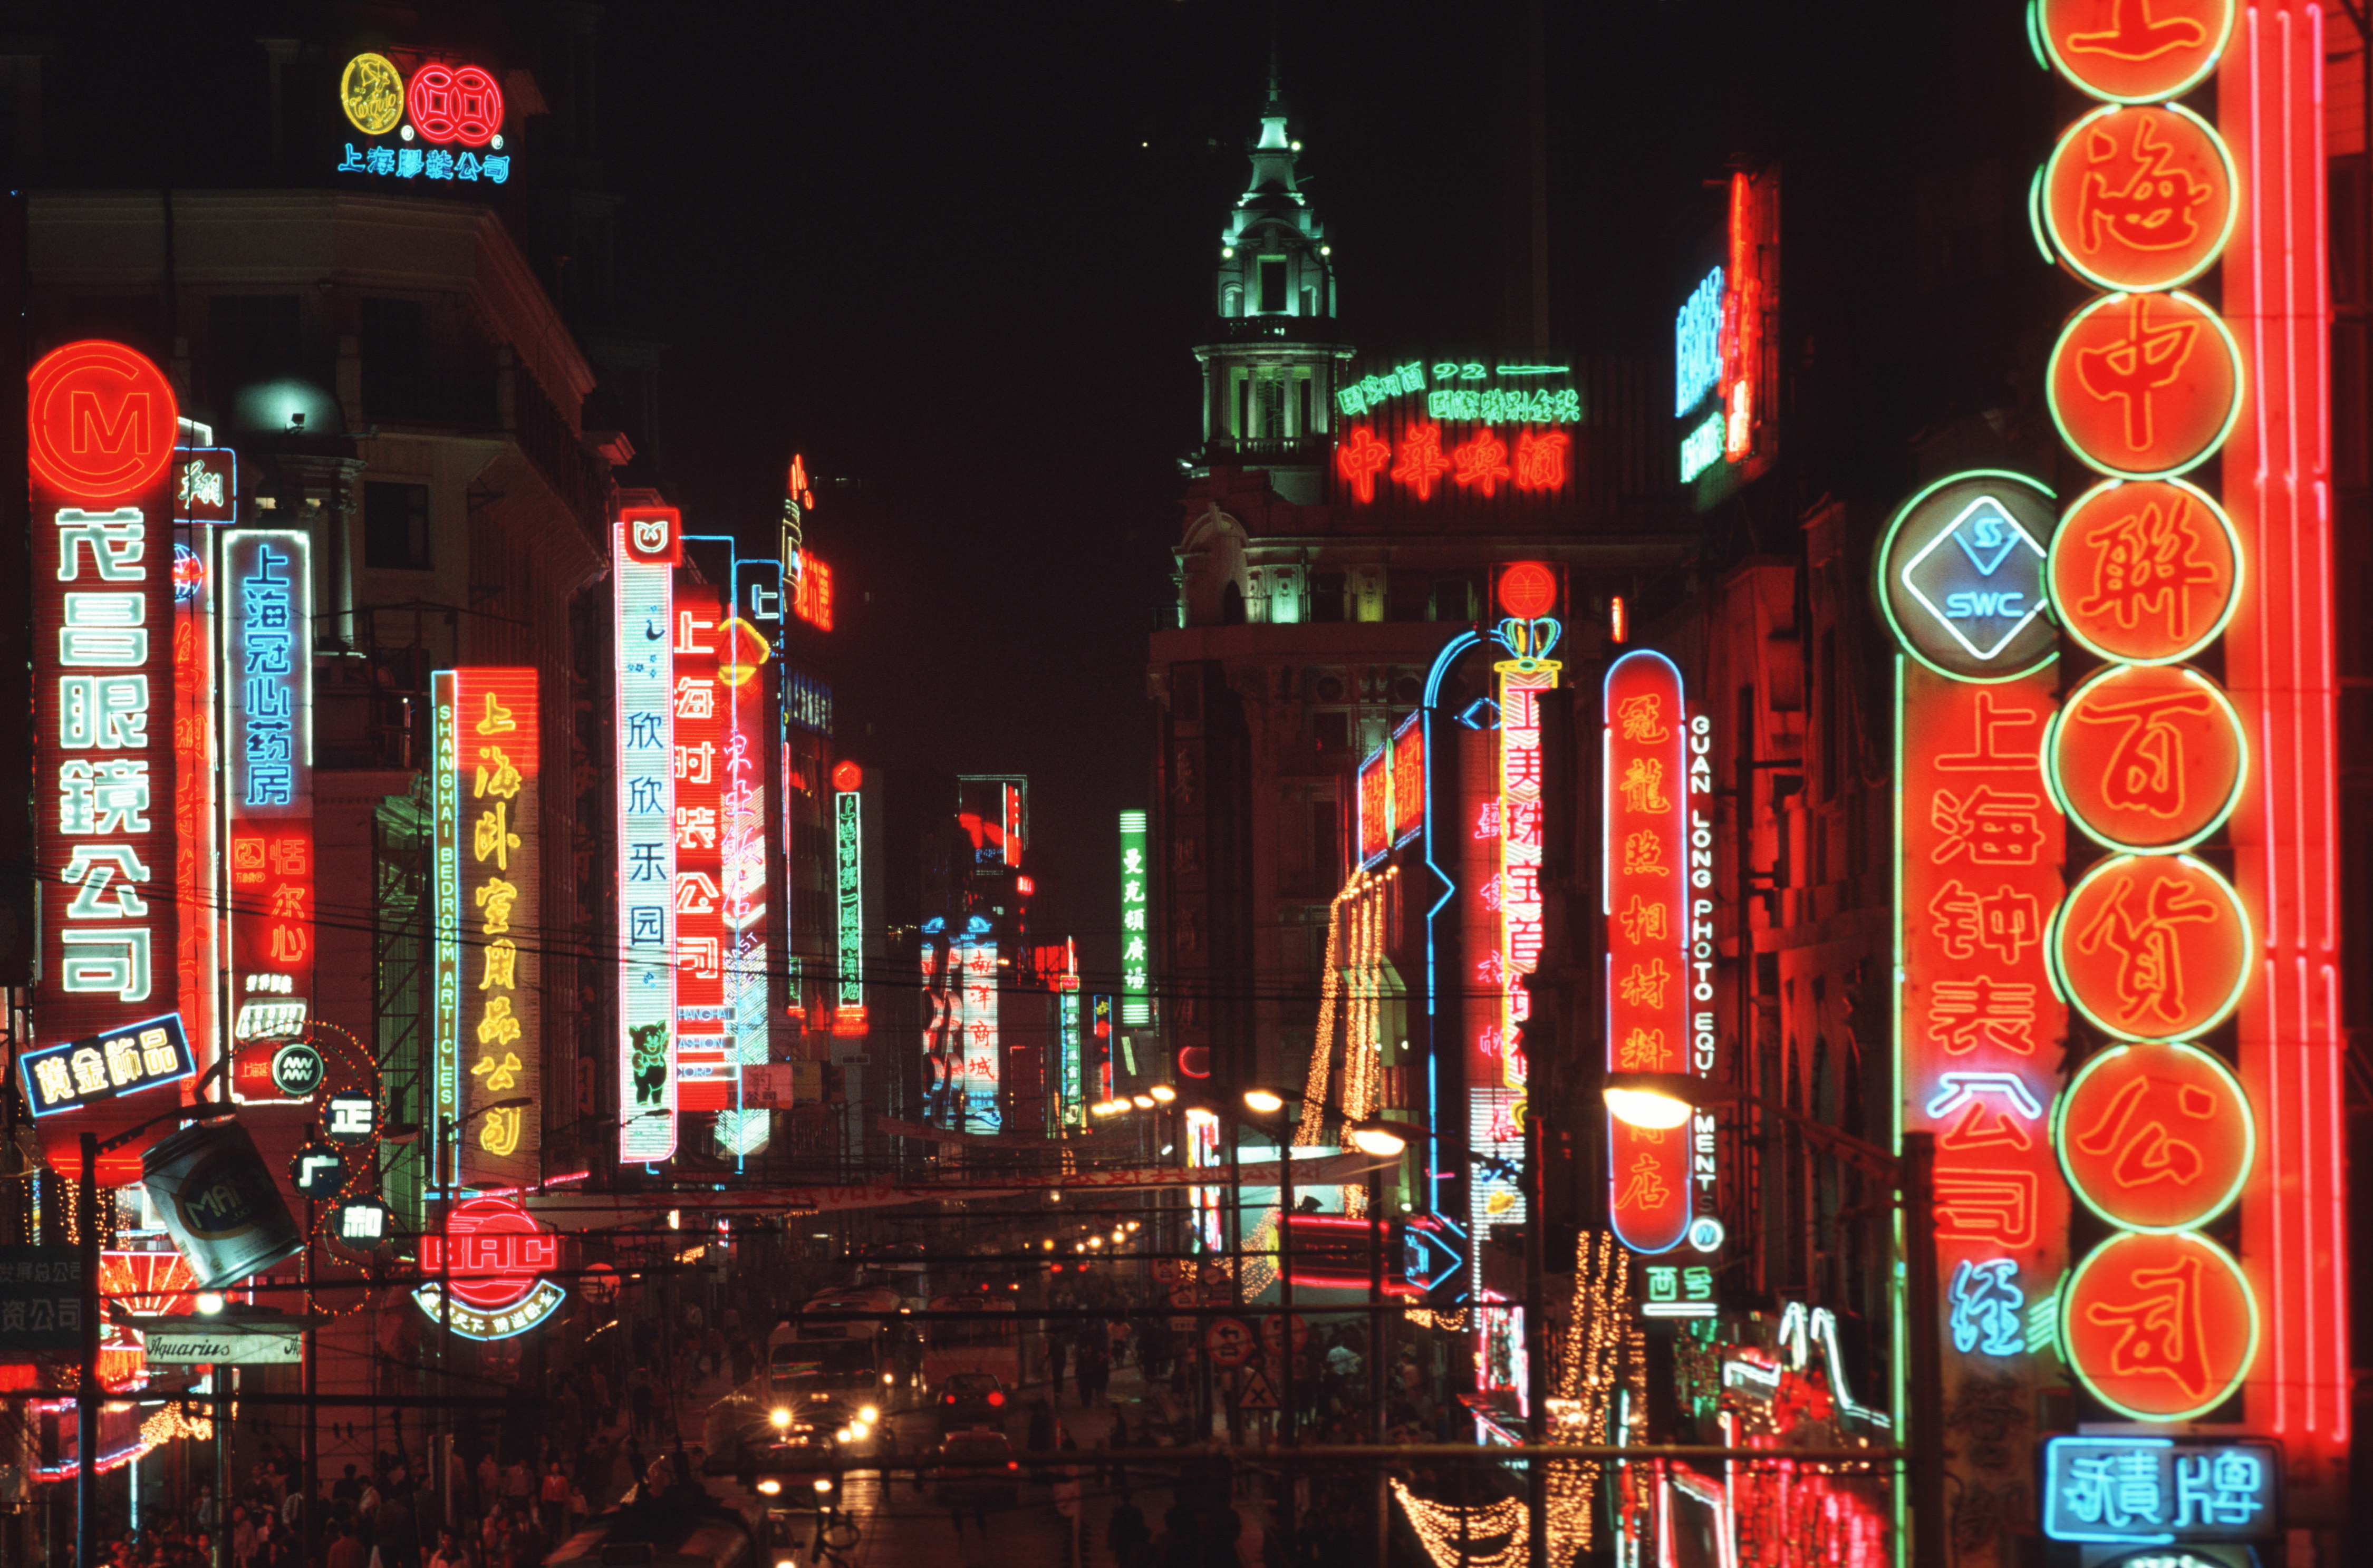 Neon advertising signs light up Nanjing Road as cars, traffic and pedestrians crowd one of Shanghai's busiest thoroughfares and shopping areas, China, November 1, 1993. /CFP